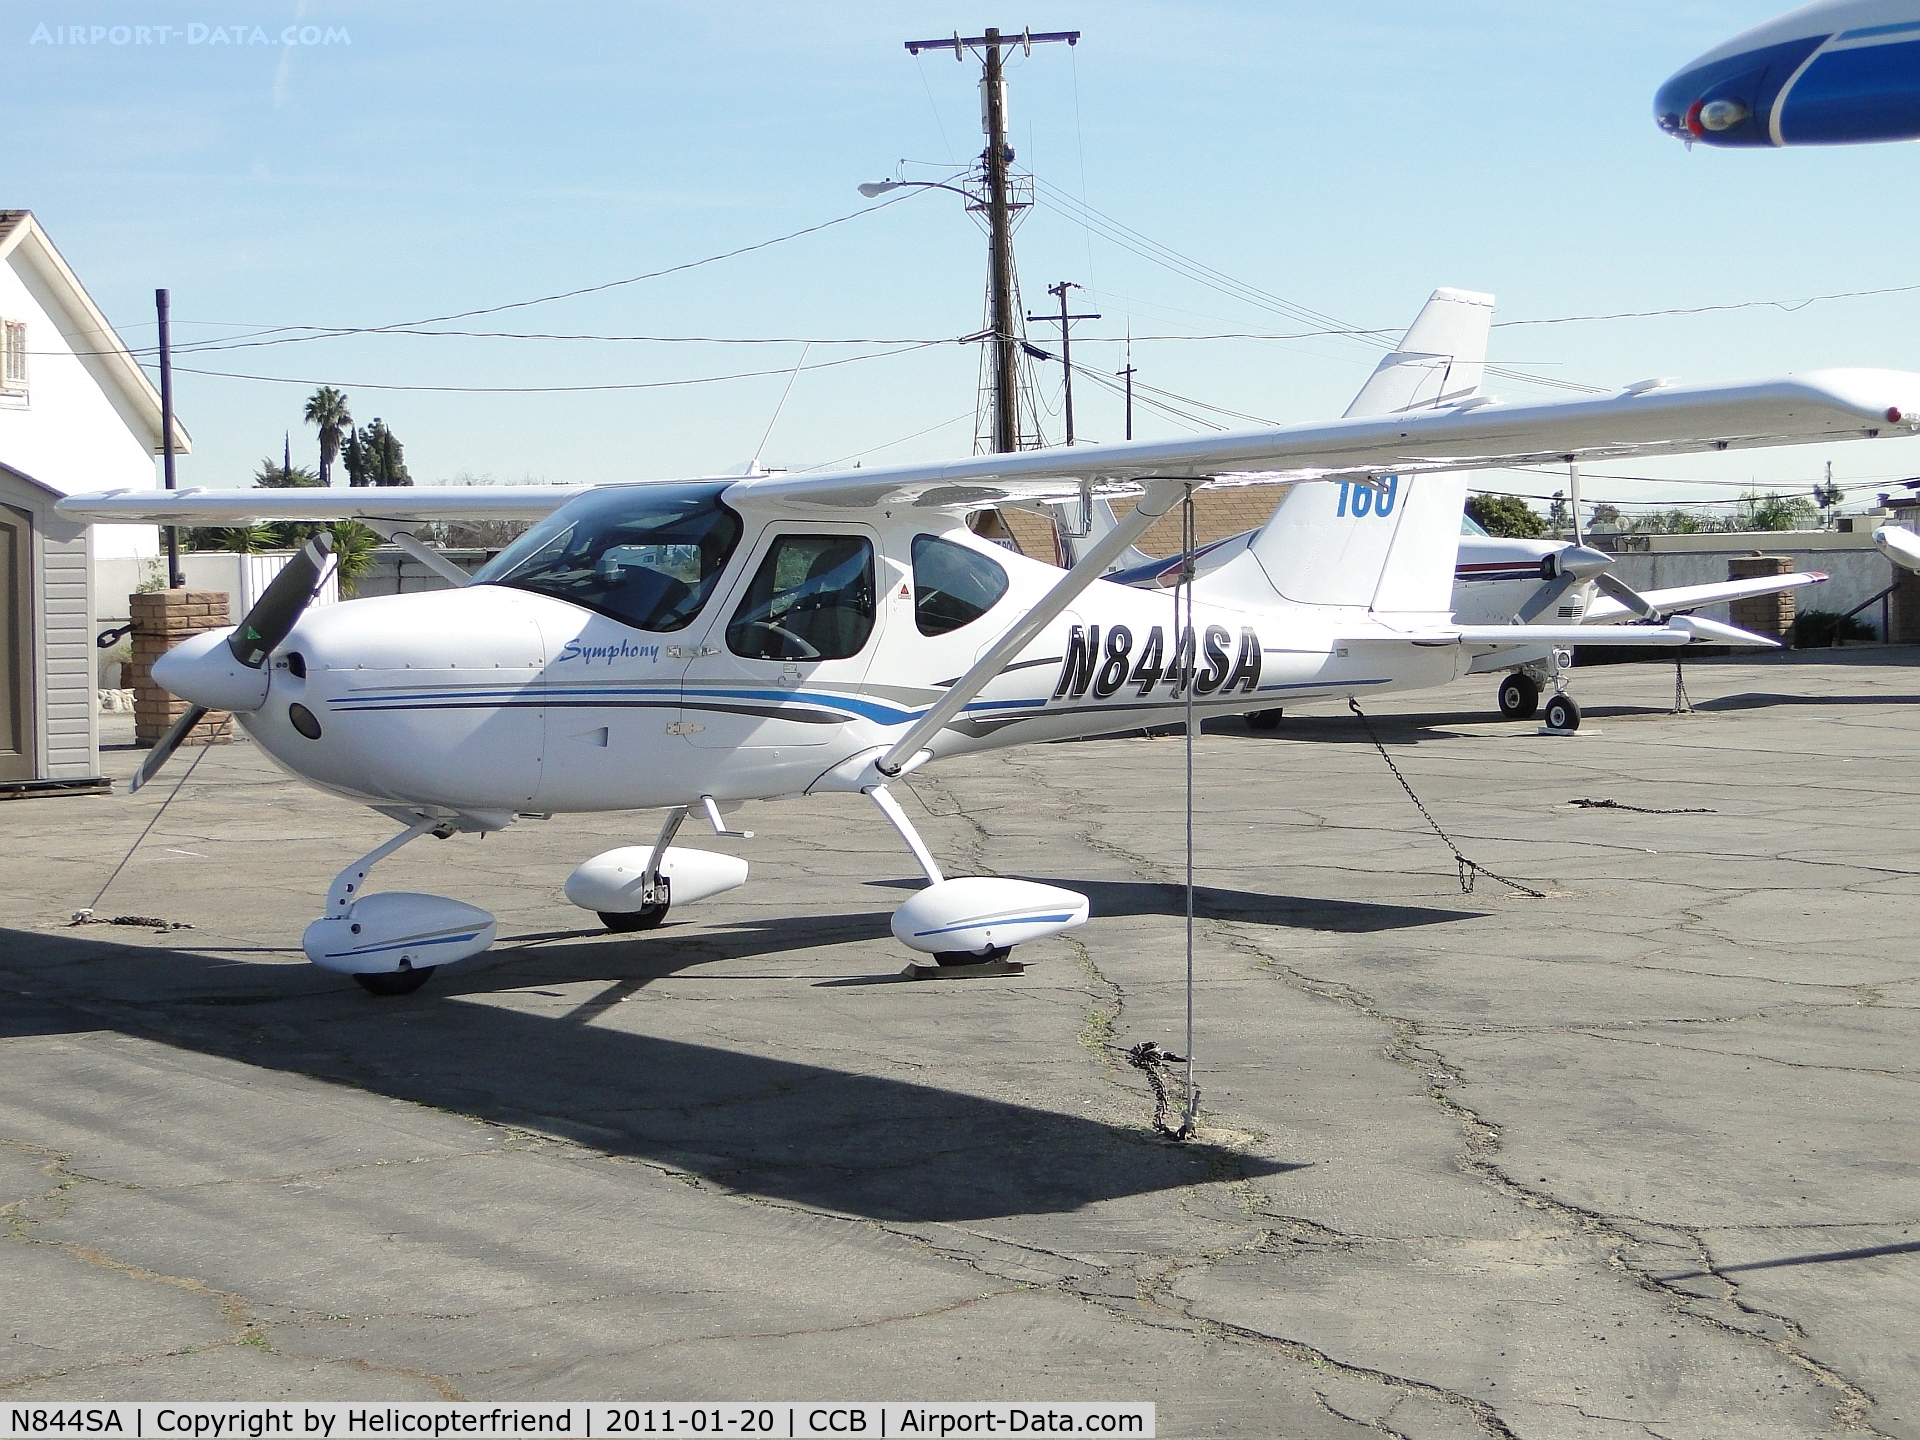 N844SA, 2006 Symphony SA-160 C/N S-0015, Parked in Foothill Sales & Service area